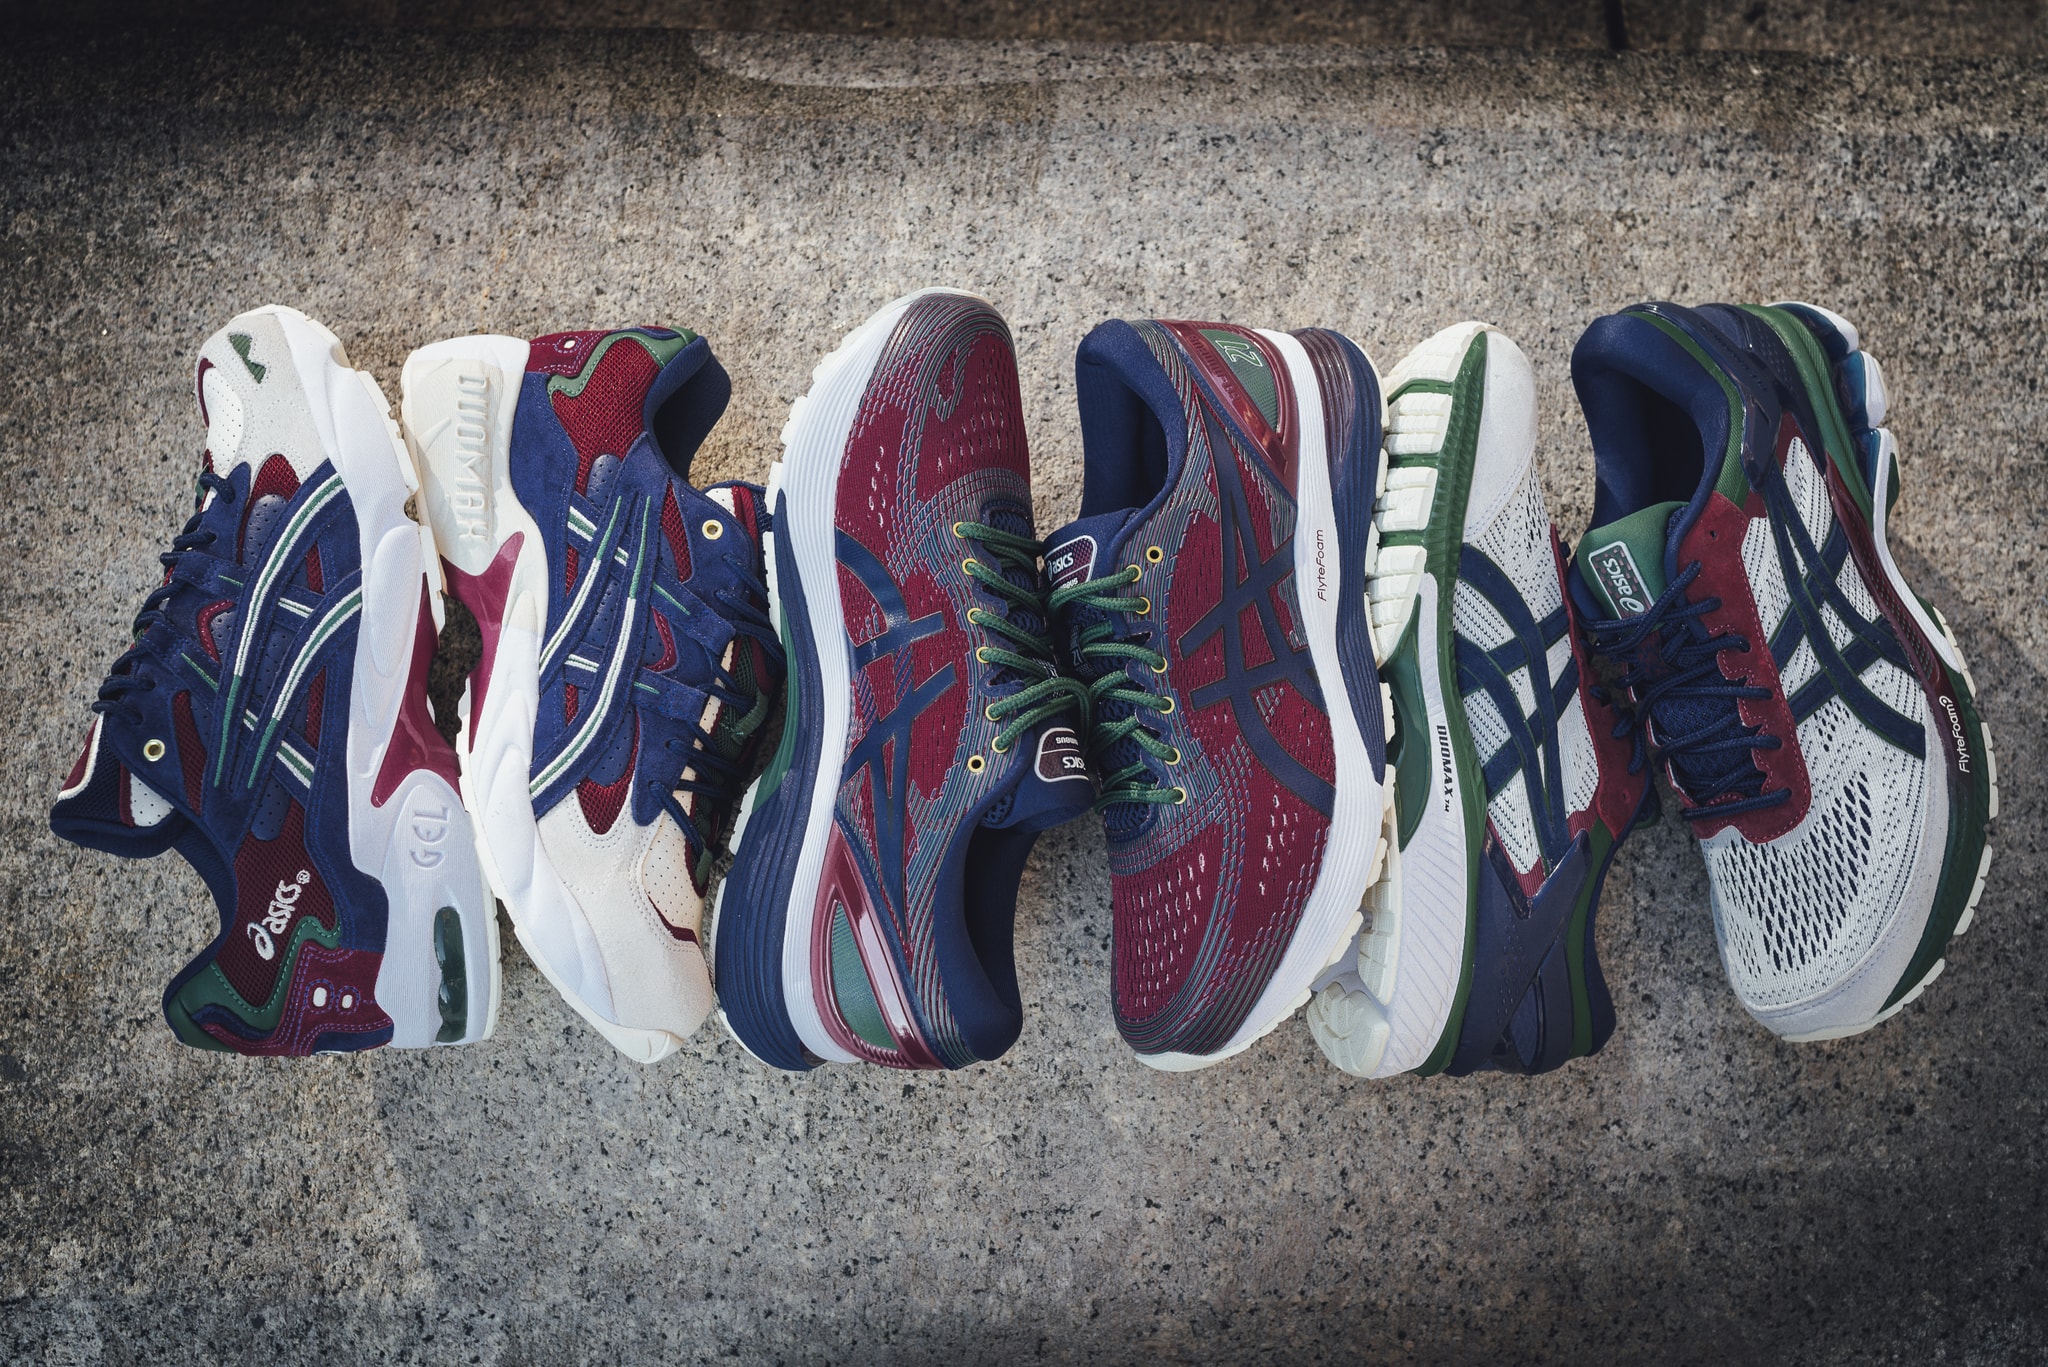 ASICS Academic Scholar gel kayano nimbus 21 26 5 og sneaker shoe sneakers shoes pack collection release info date cost price 2019 august